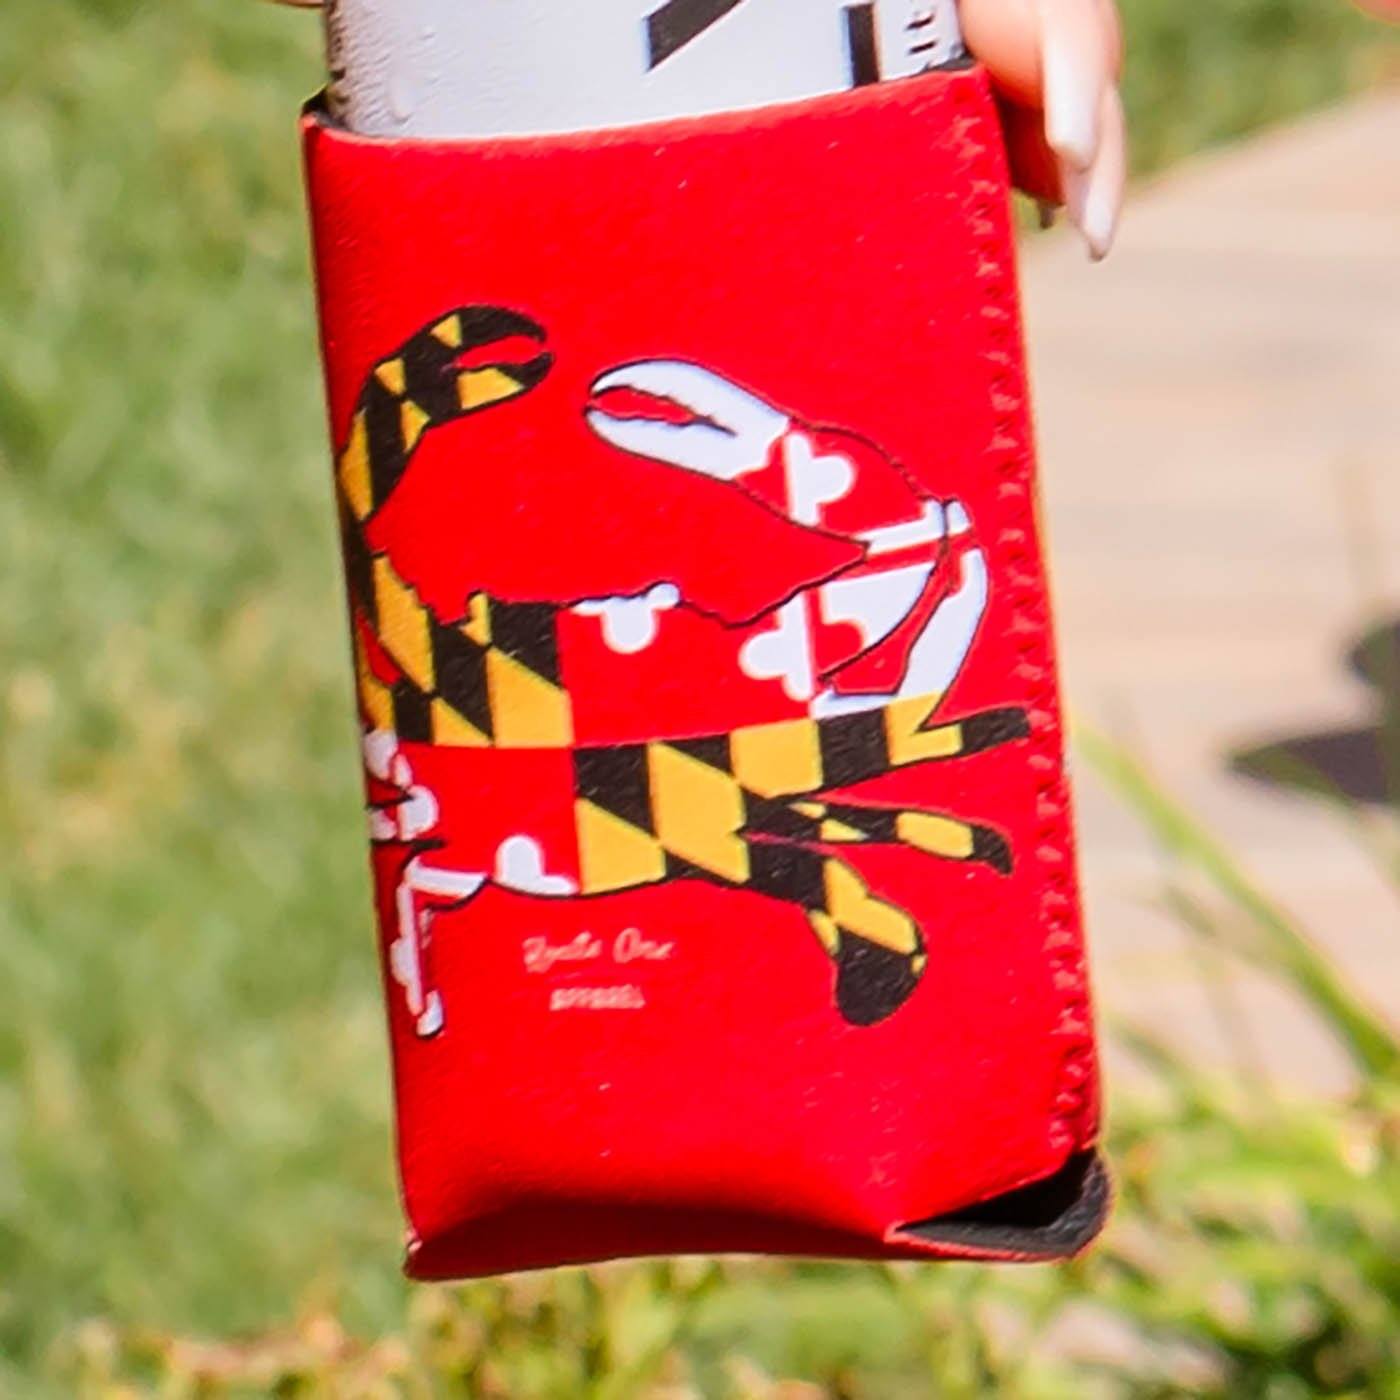 Maryland Full Flag Crab (Red) / Can Cooler - Route One Apparel